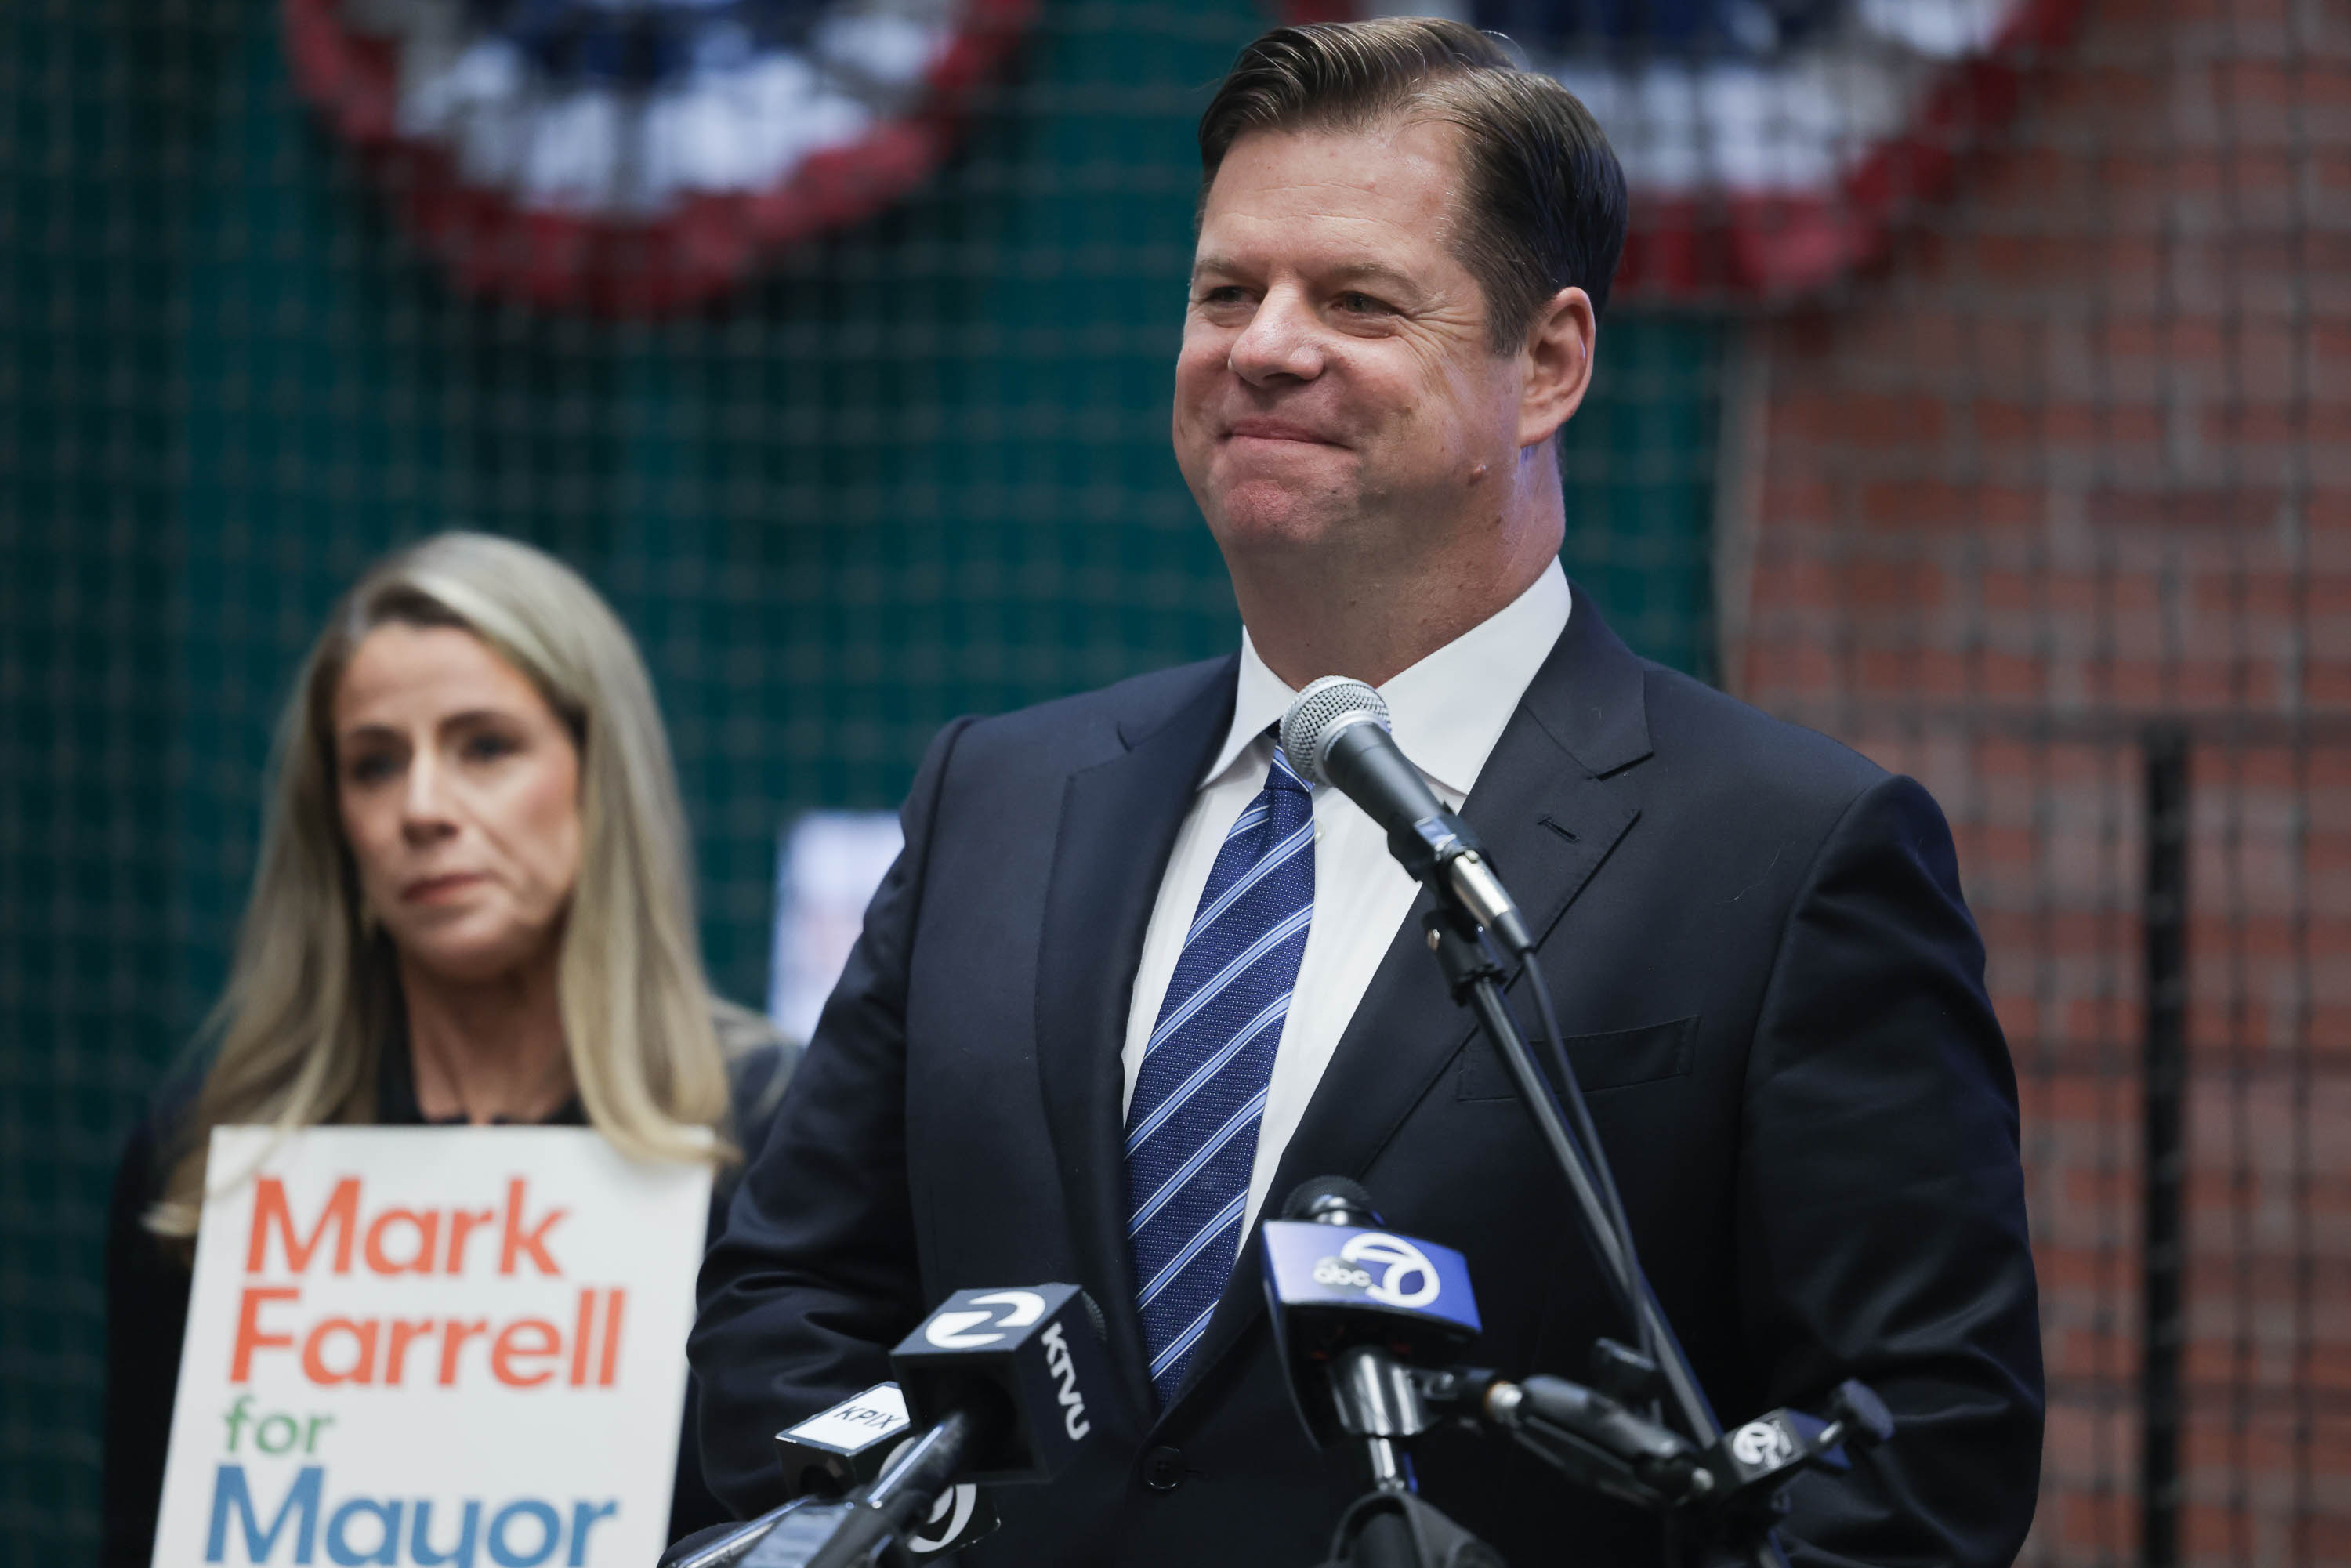 Mark Farrell, wearing a suit and tie, smiles at a podium with microphones as his wife holds &quot;Mark Farrell for Mayor&quot; sign behind him.